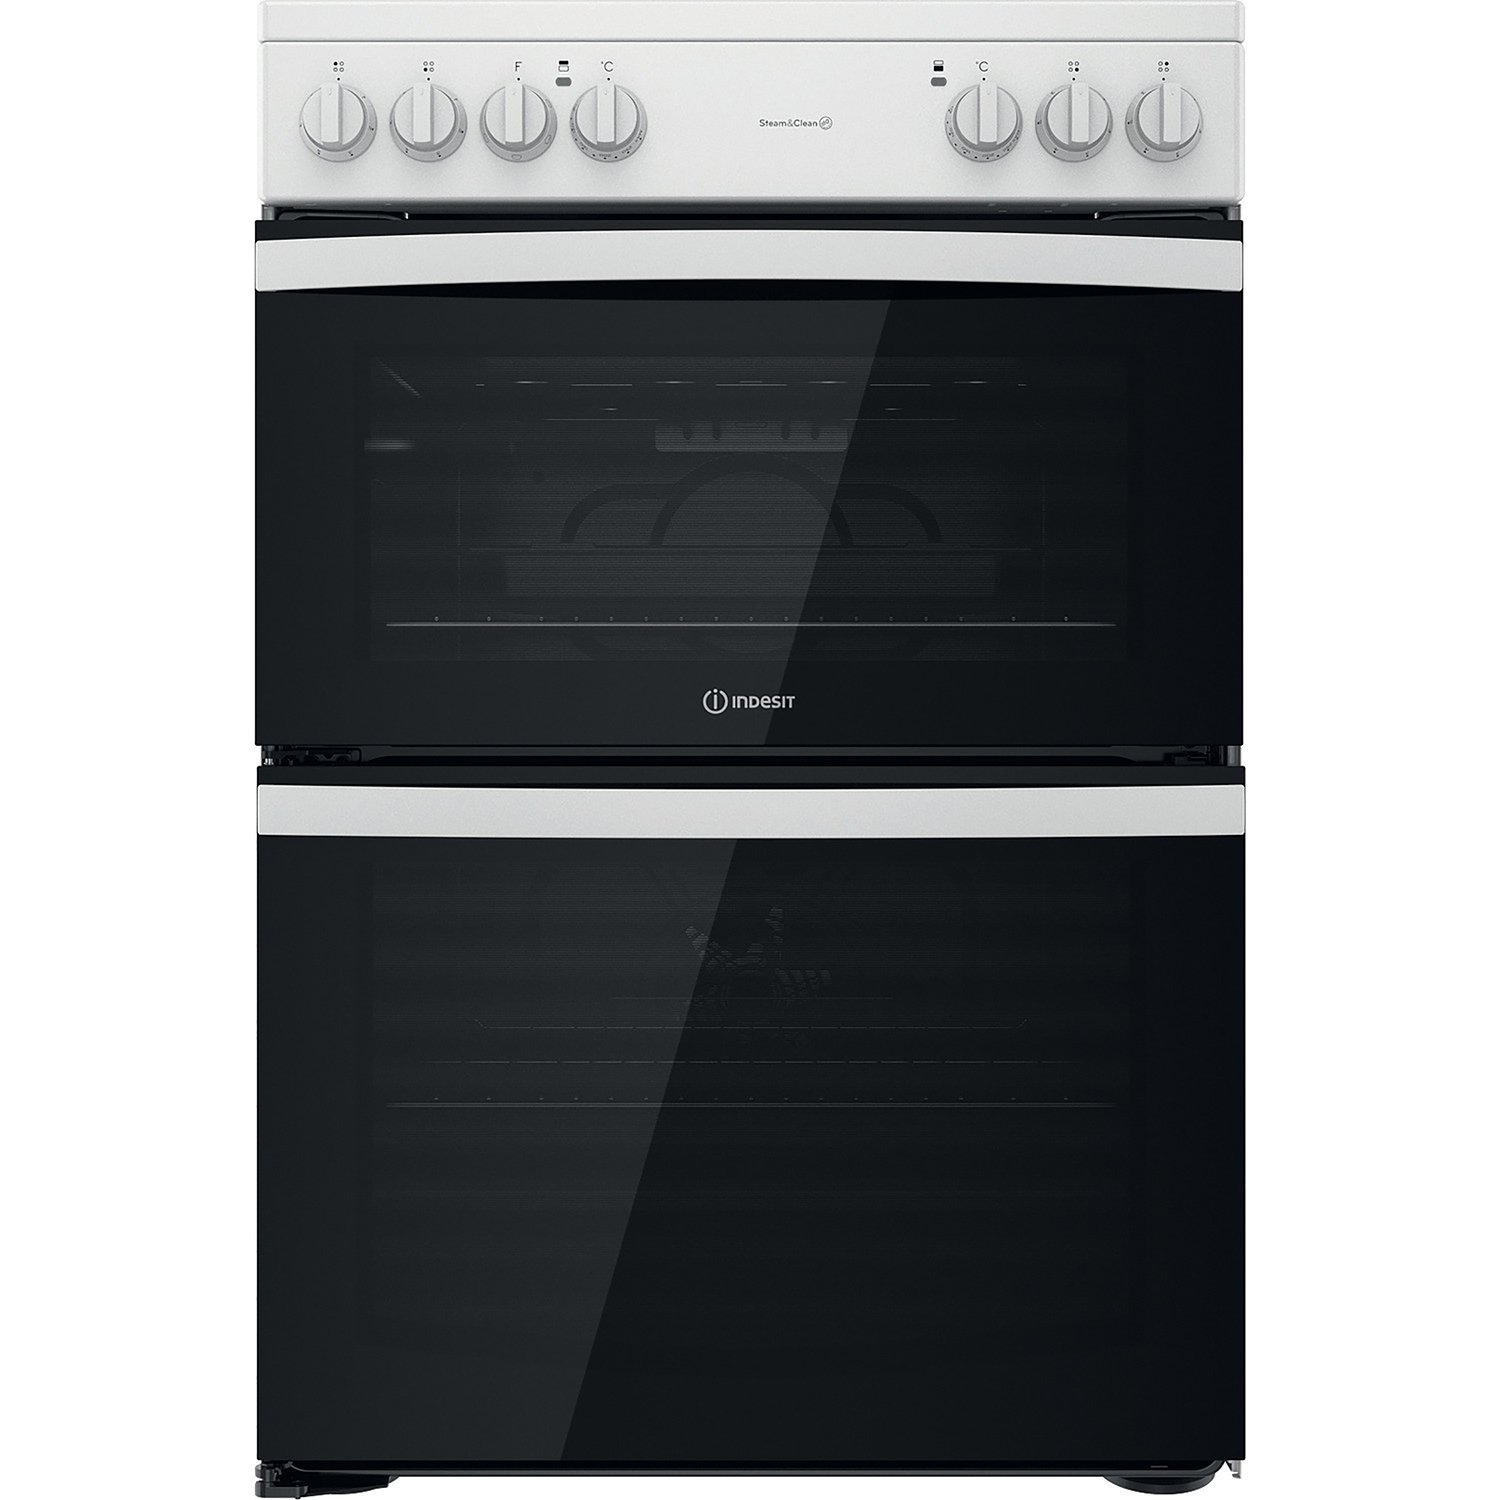 Indesit ID67V9KMW/UK 60cm Double Oven Electric Cooker White